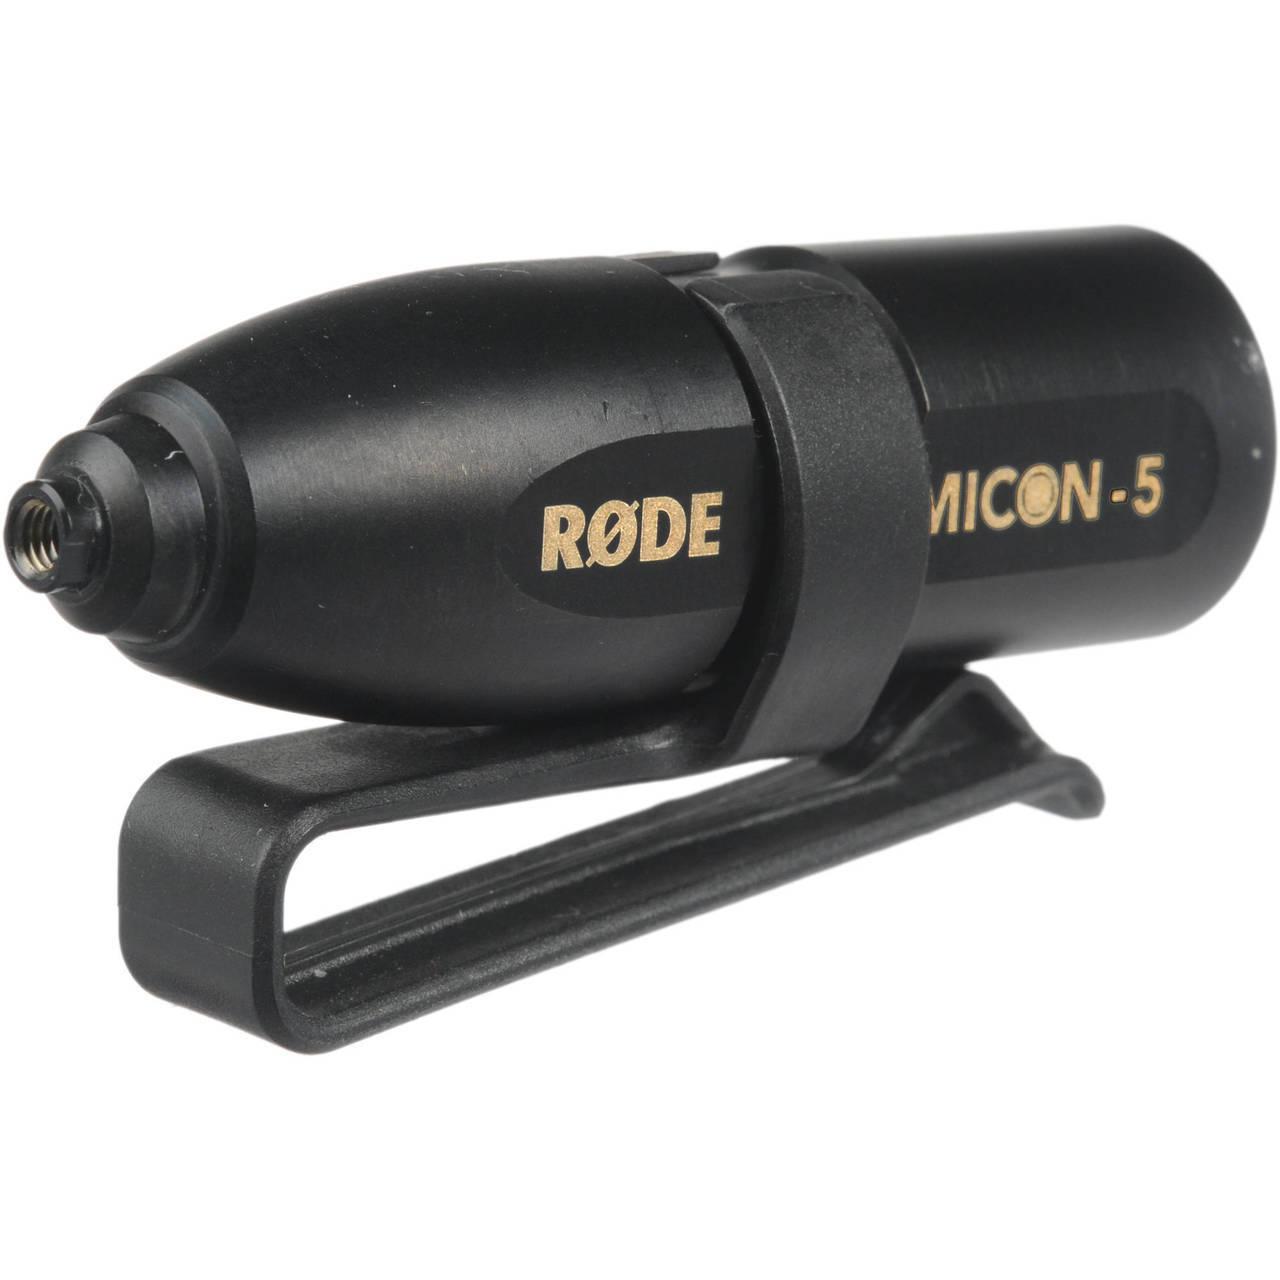 Rode - MiCon 5_168